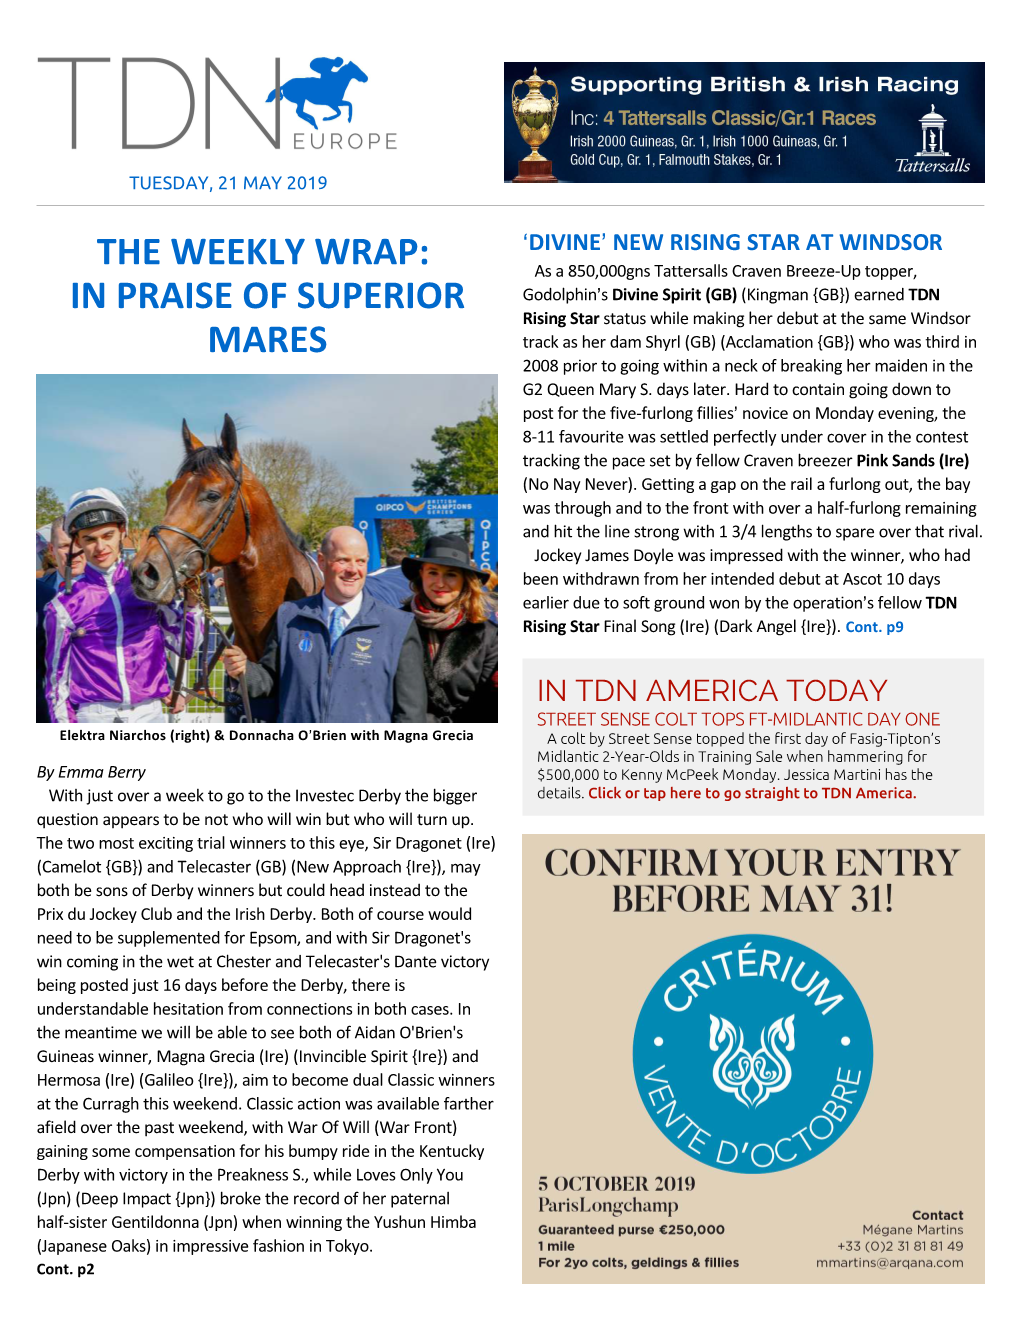 The Weekly Wrap: in Praise of Superior Mares